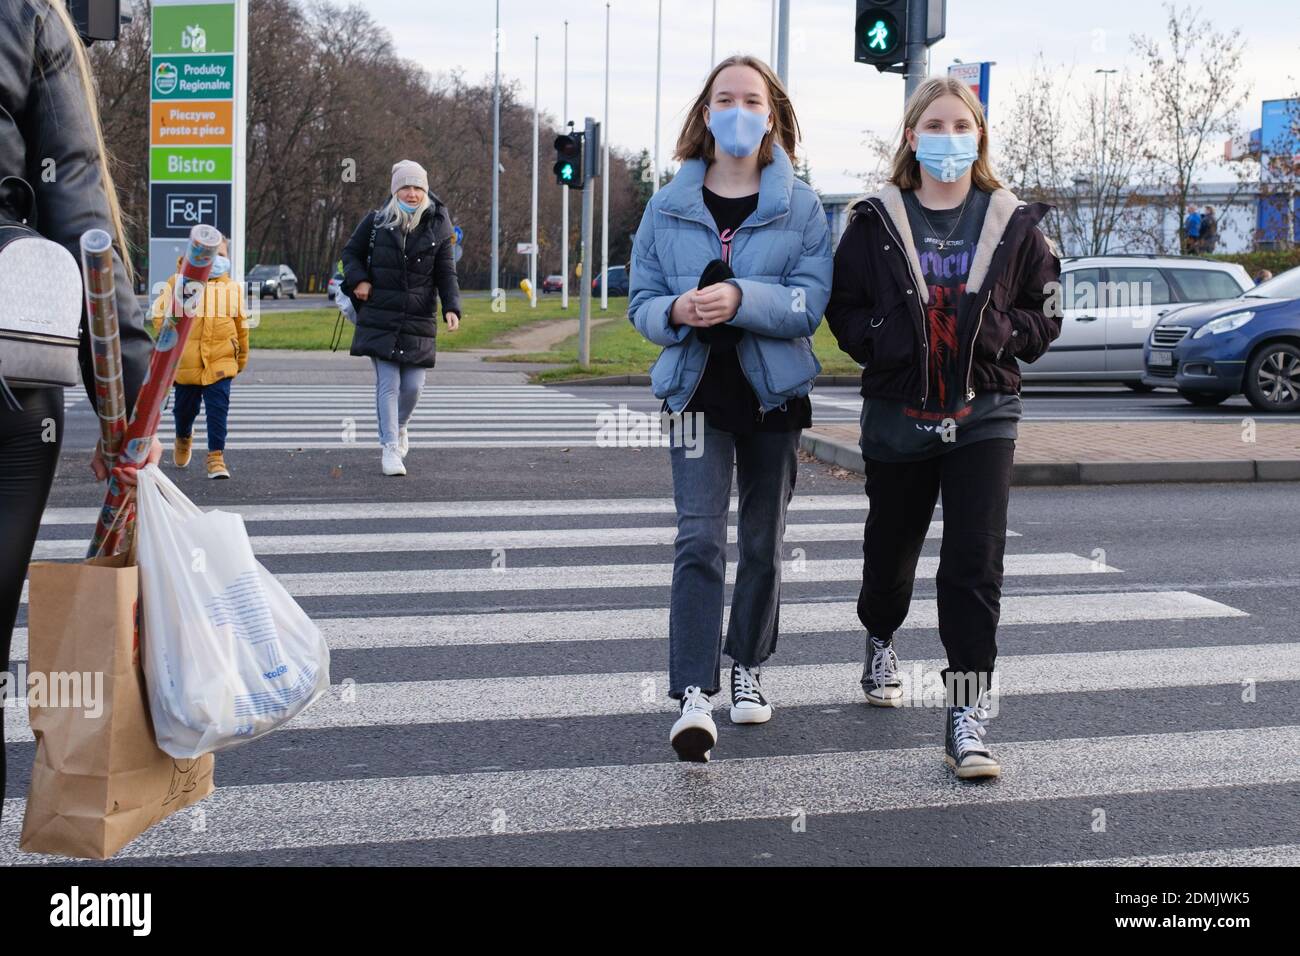 LUBIN, POLAND - DECEMBER 05, 2020. Two teenagers with face masks due to pandemic Covid-19 at the crosswalk. Stock Photo